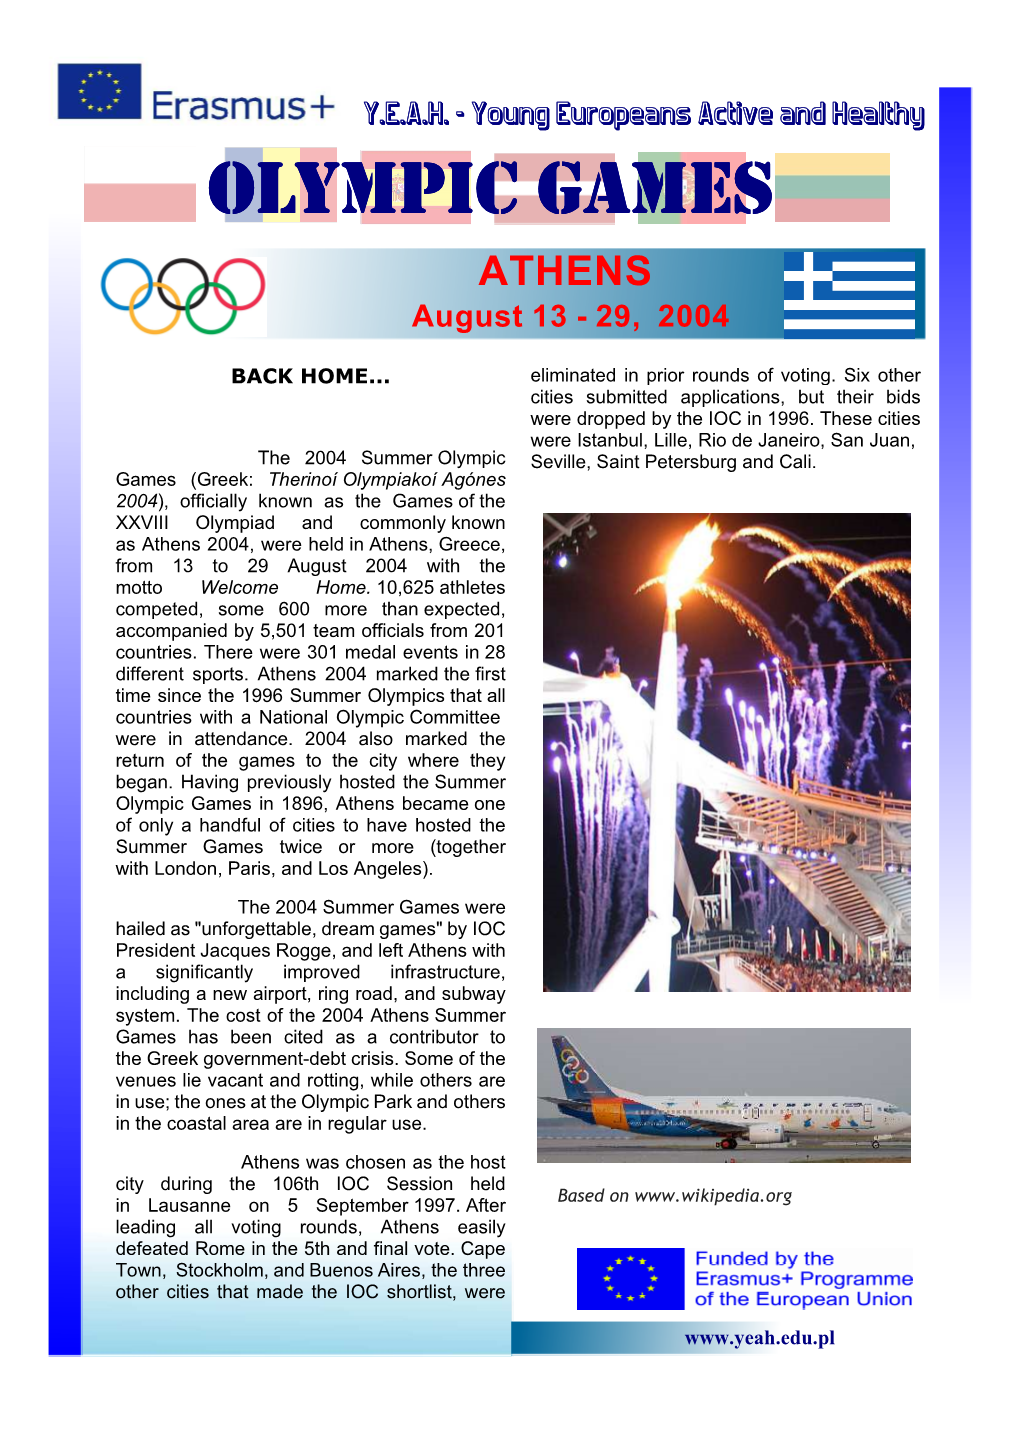 OLYMPIC GAMES ATHENS August 13 - 29, 2004